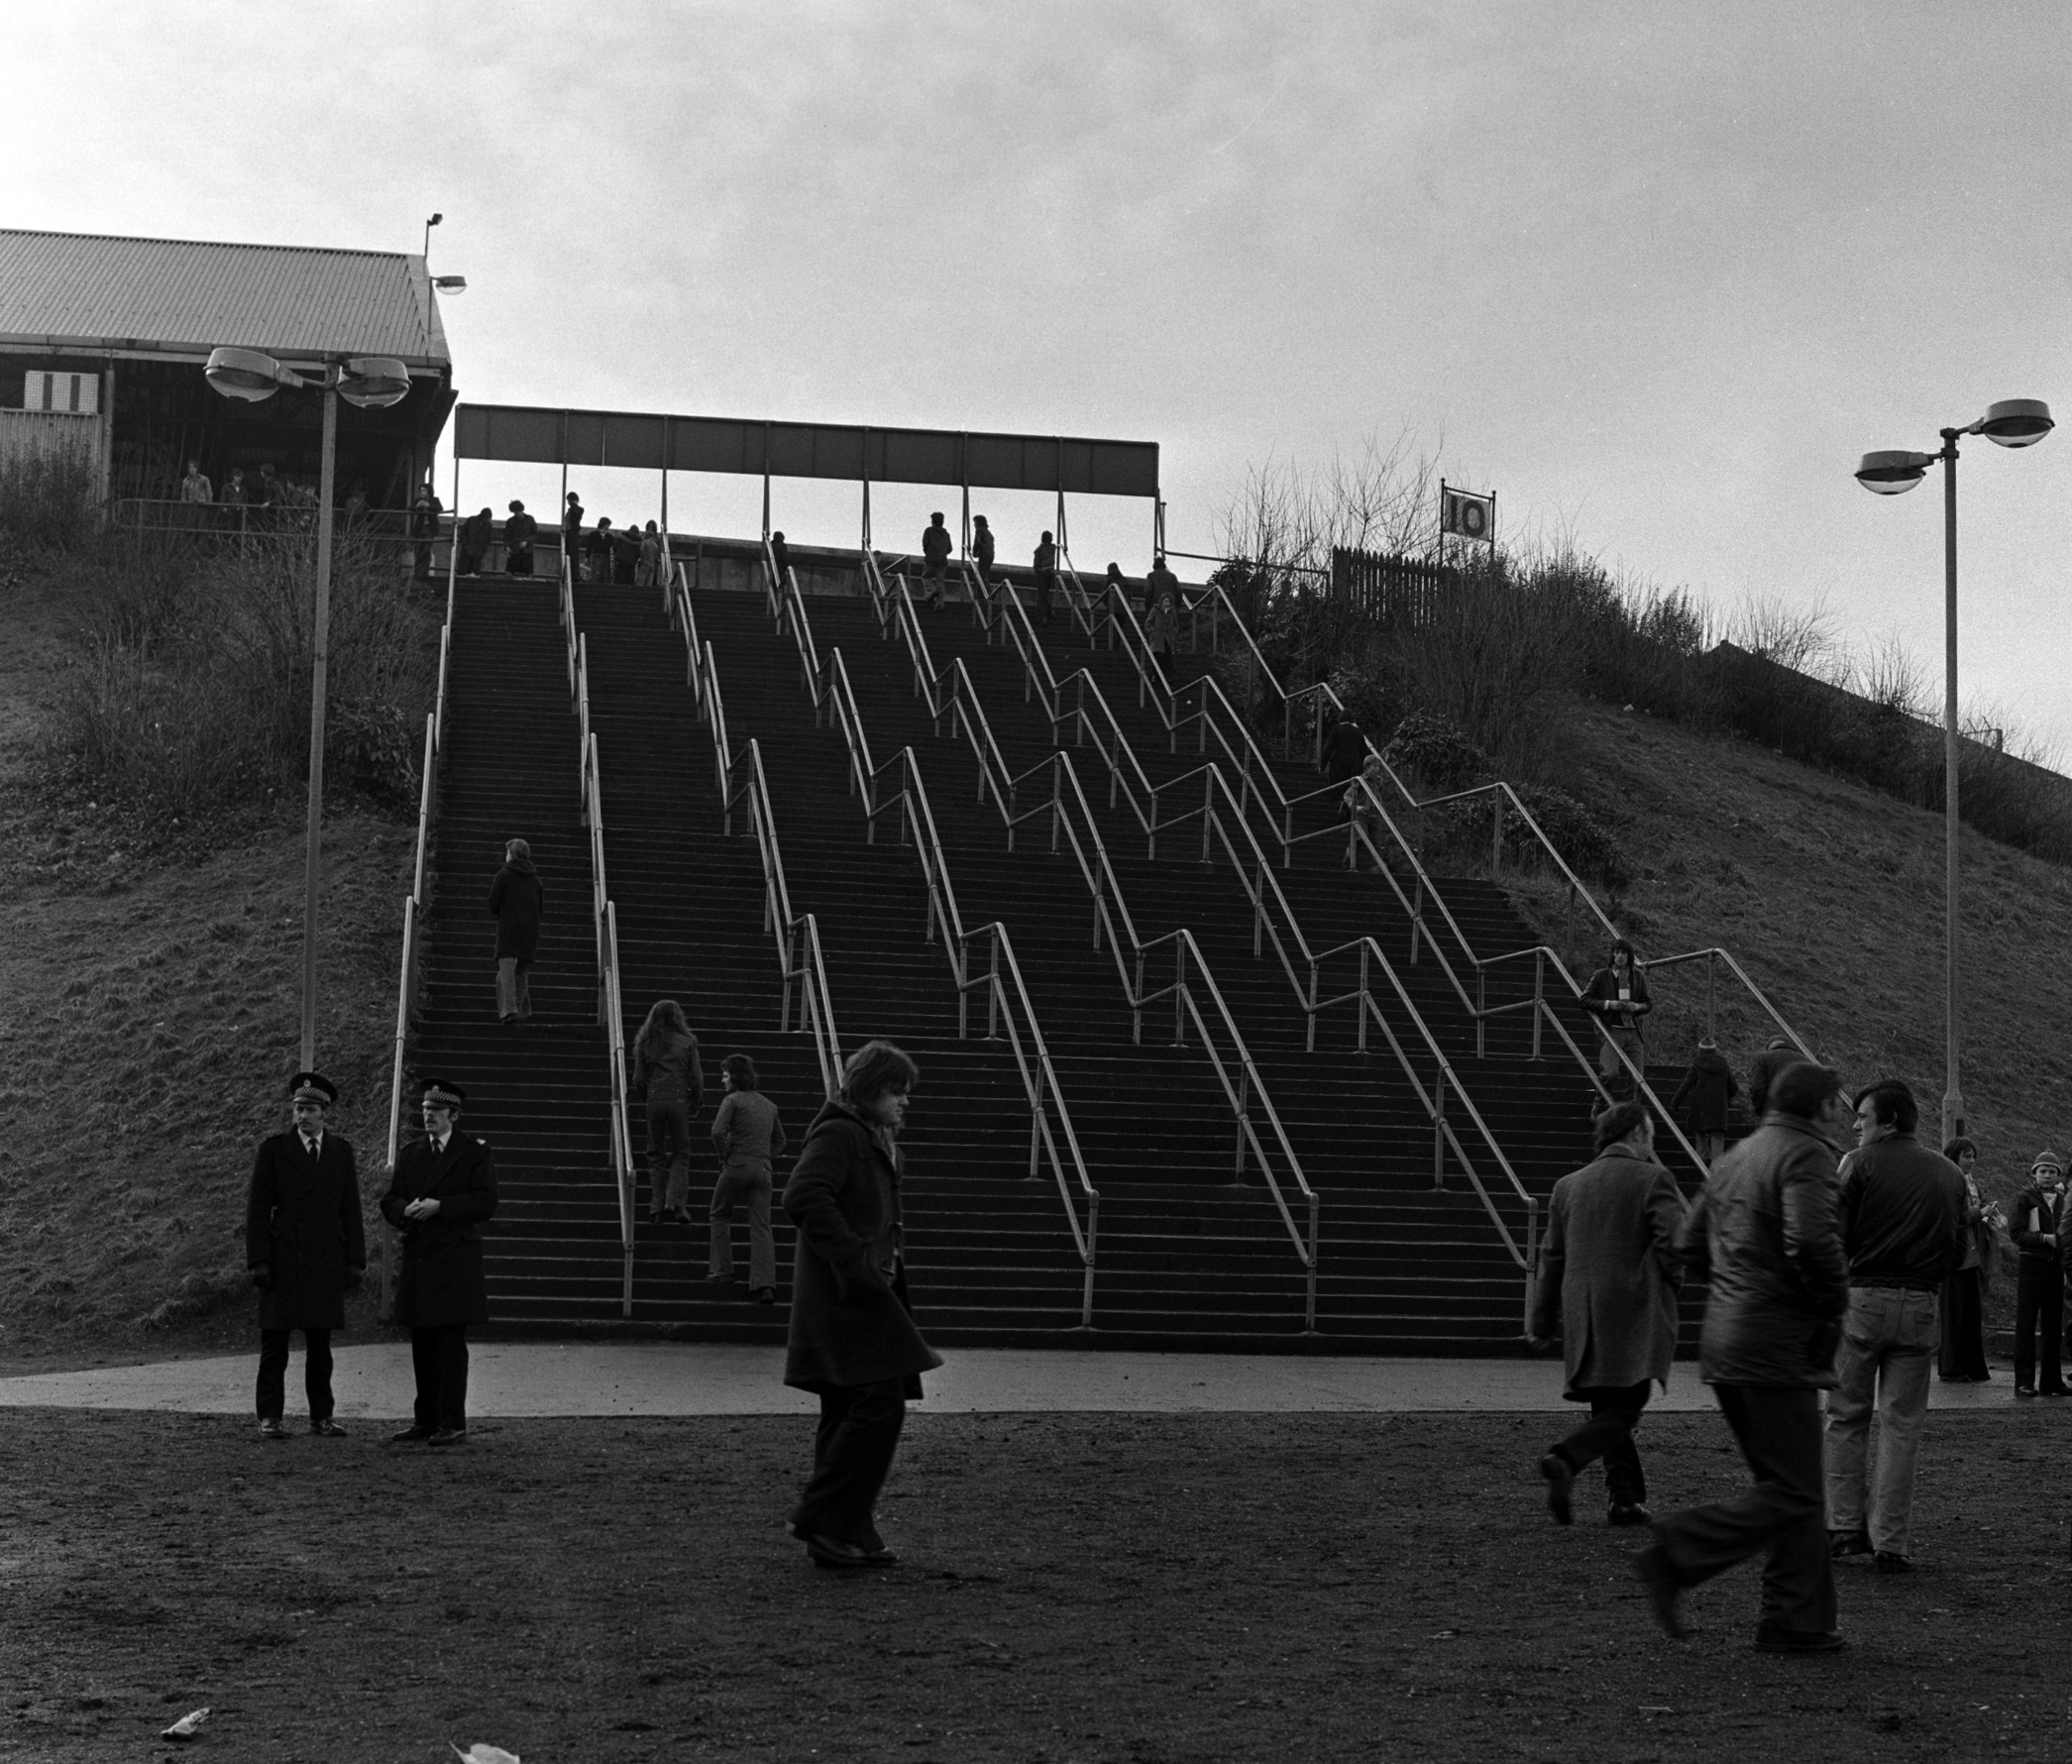 The re-built Stairway 13, where 66 people died during the Ibrox disaster. Credit: SNS